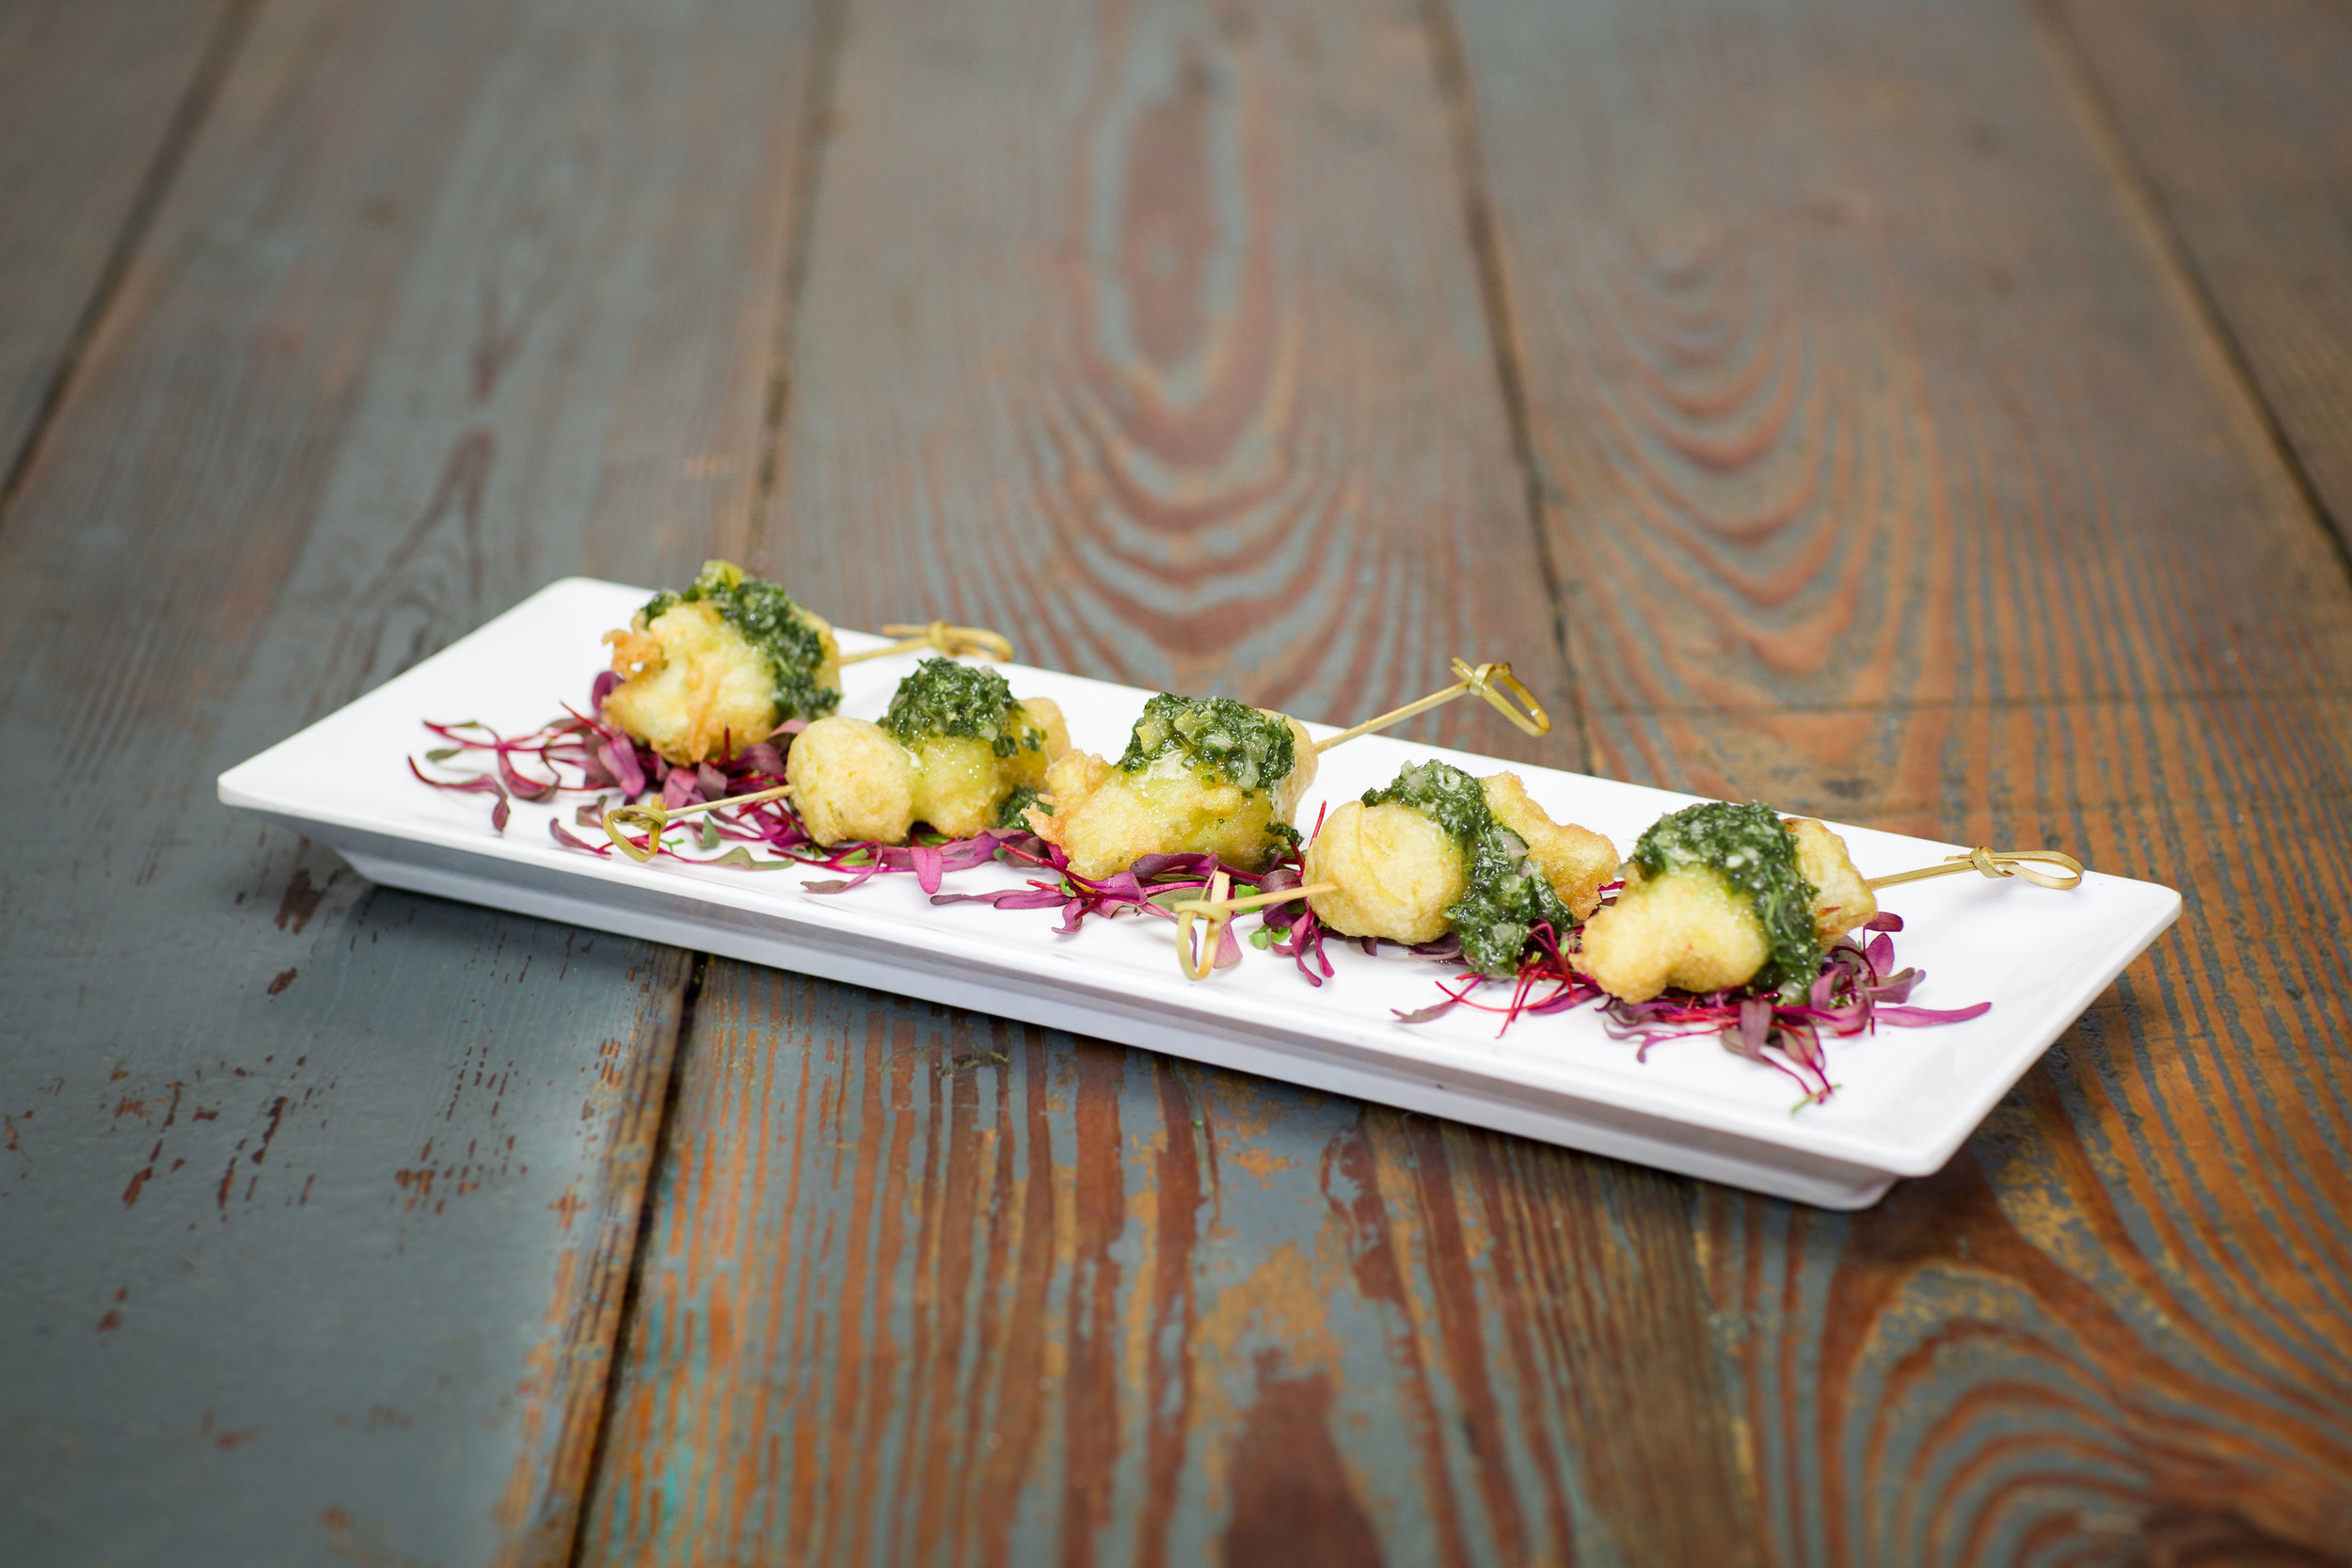 Artichoke Hearts & Cauliflower Fritters (V) - Hors d’ Oeuvres